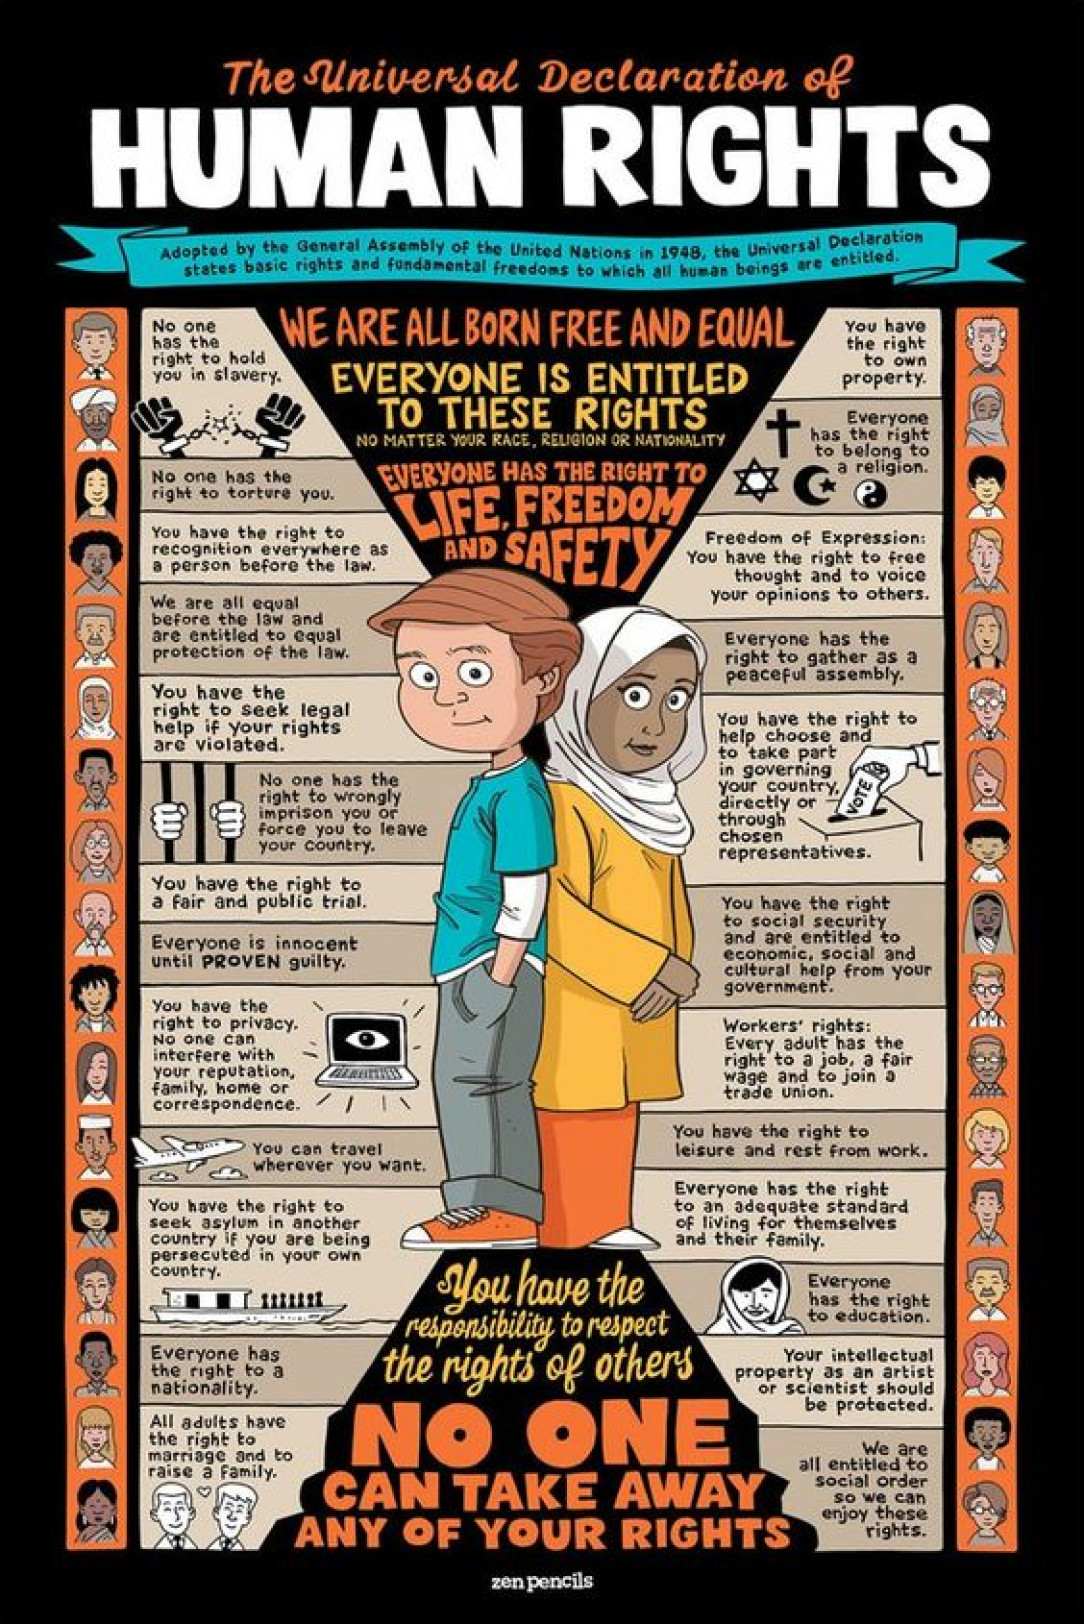 The universal declaration of human rights